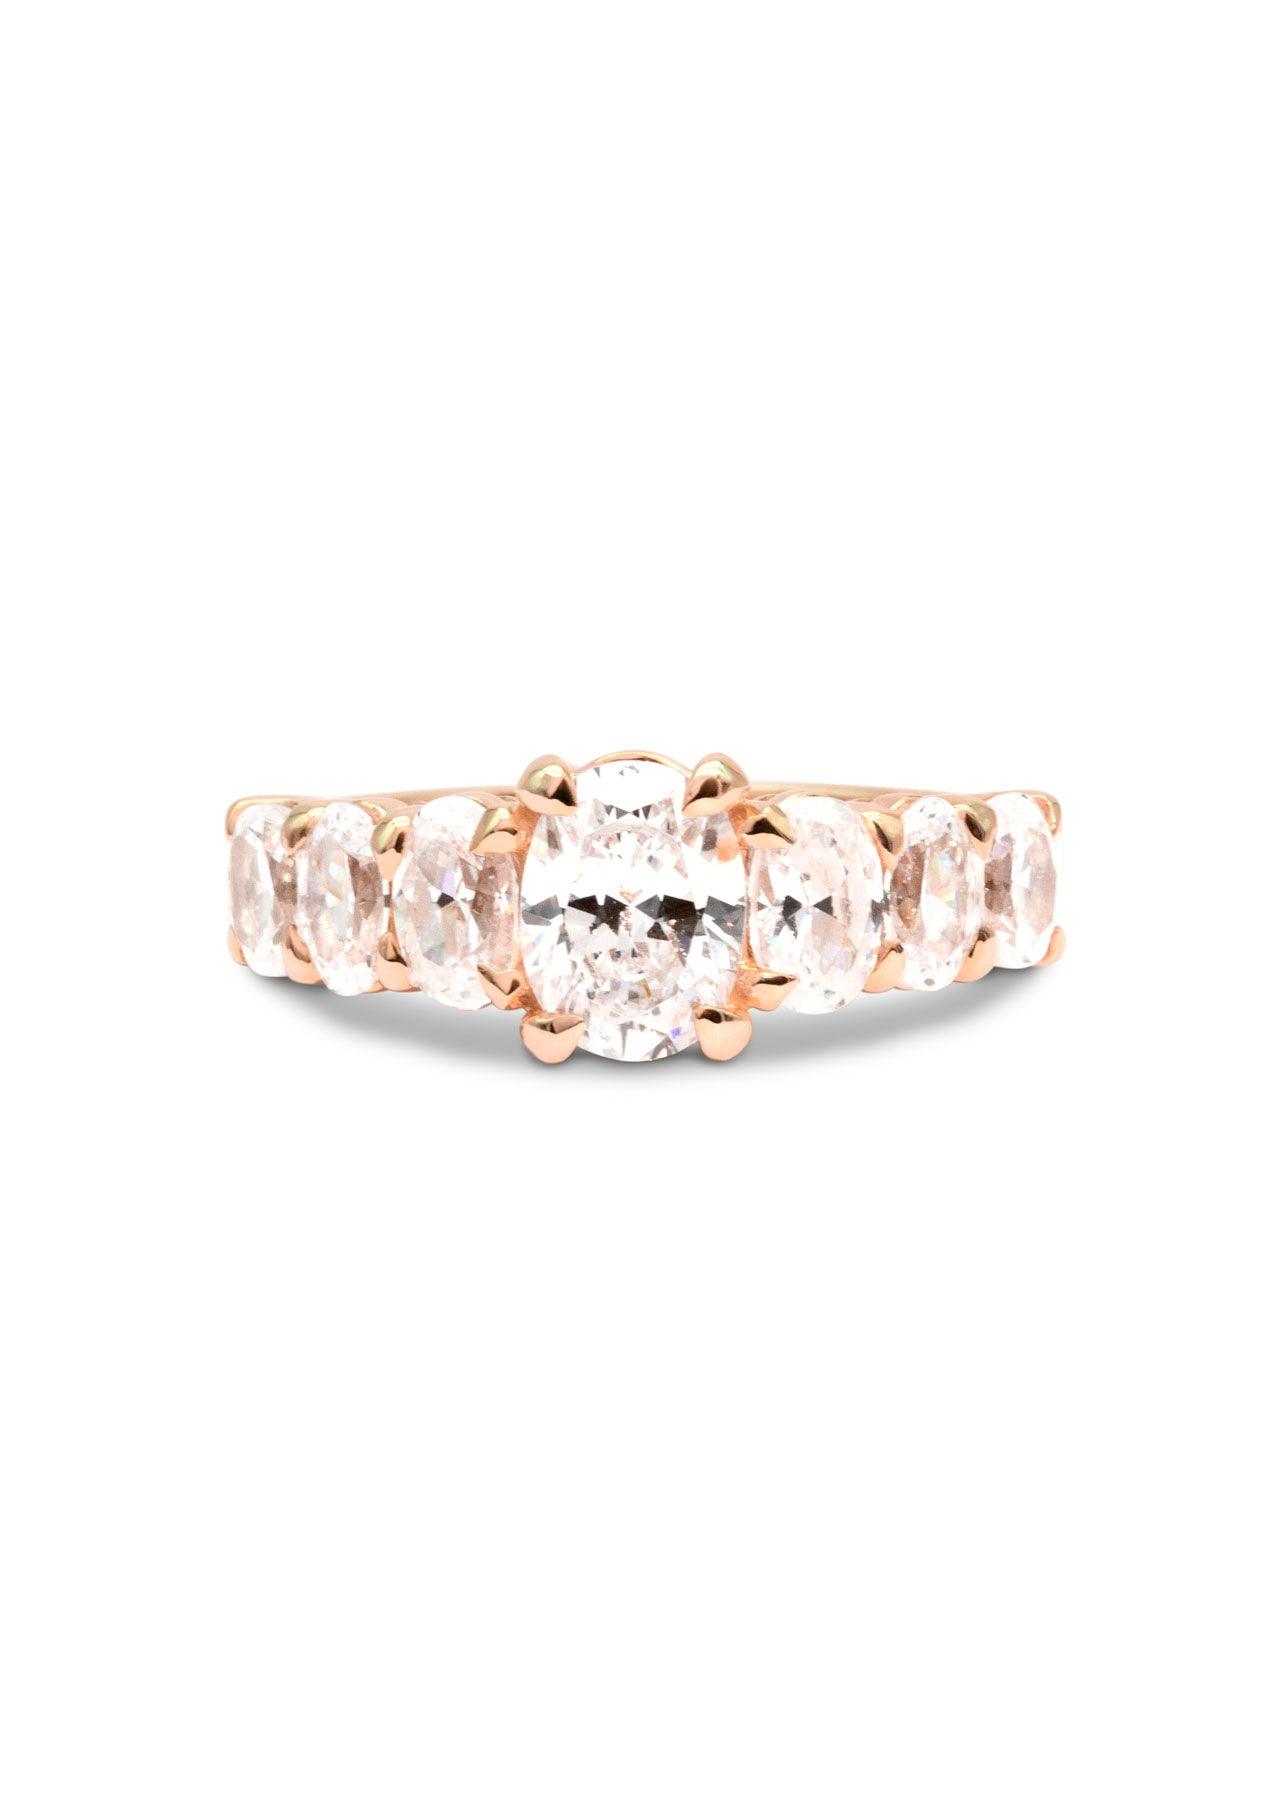 The Oval Banks Rose Gold Cultured Diamond Ring